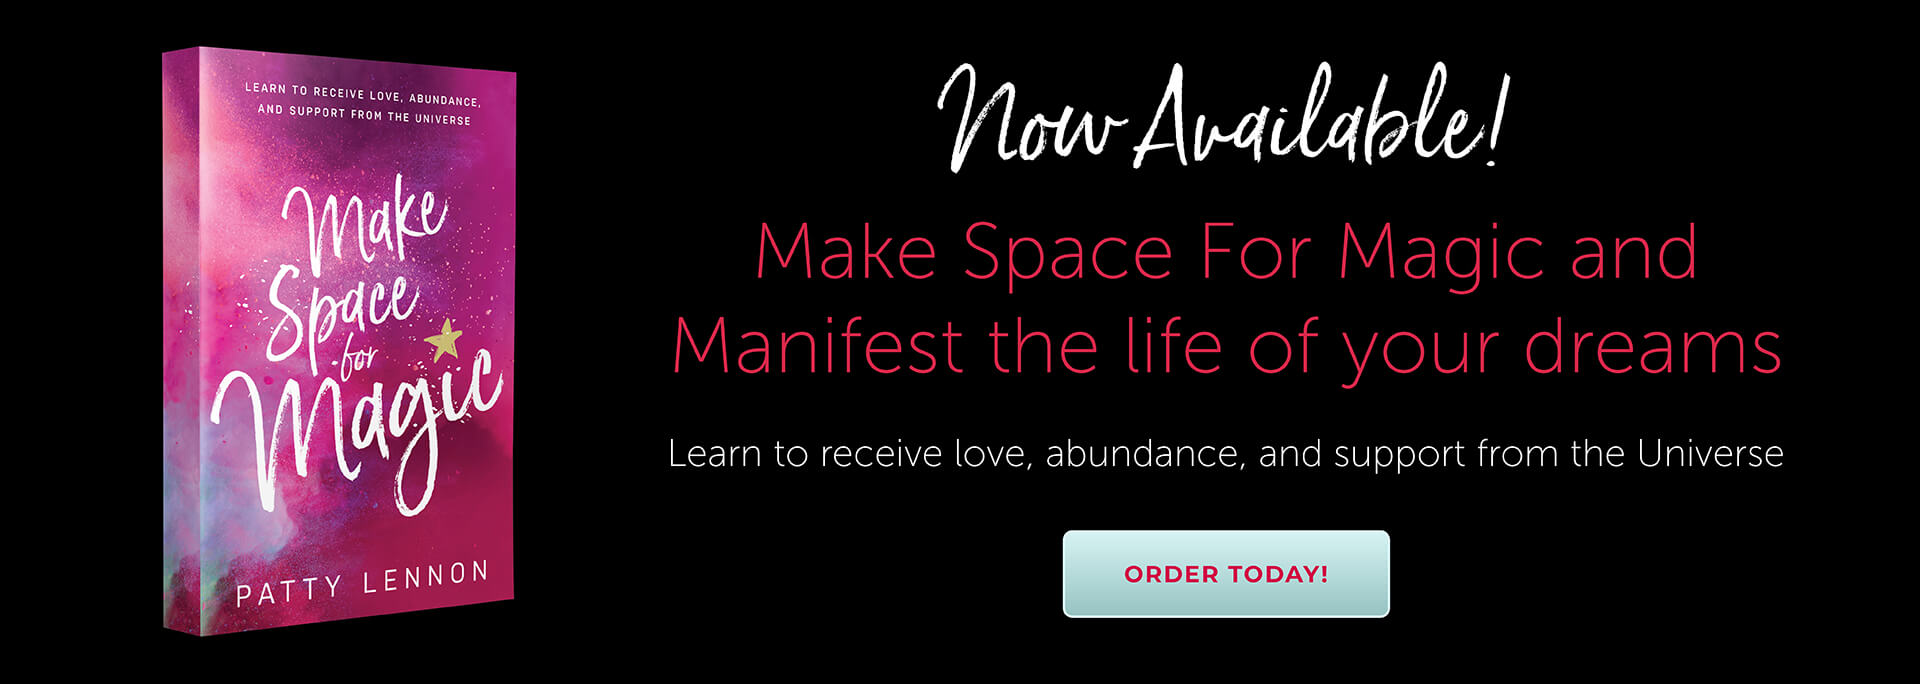 Now Available - Make Space for Magic and Manifest the life of your dreams. Learn to receive love, abundance and support from the Universe - Order today